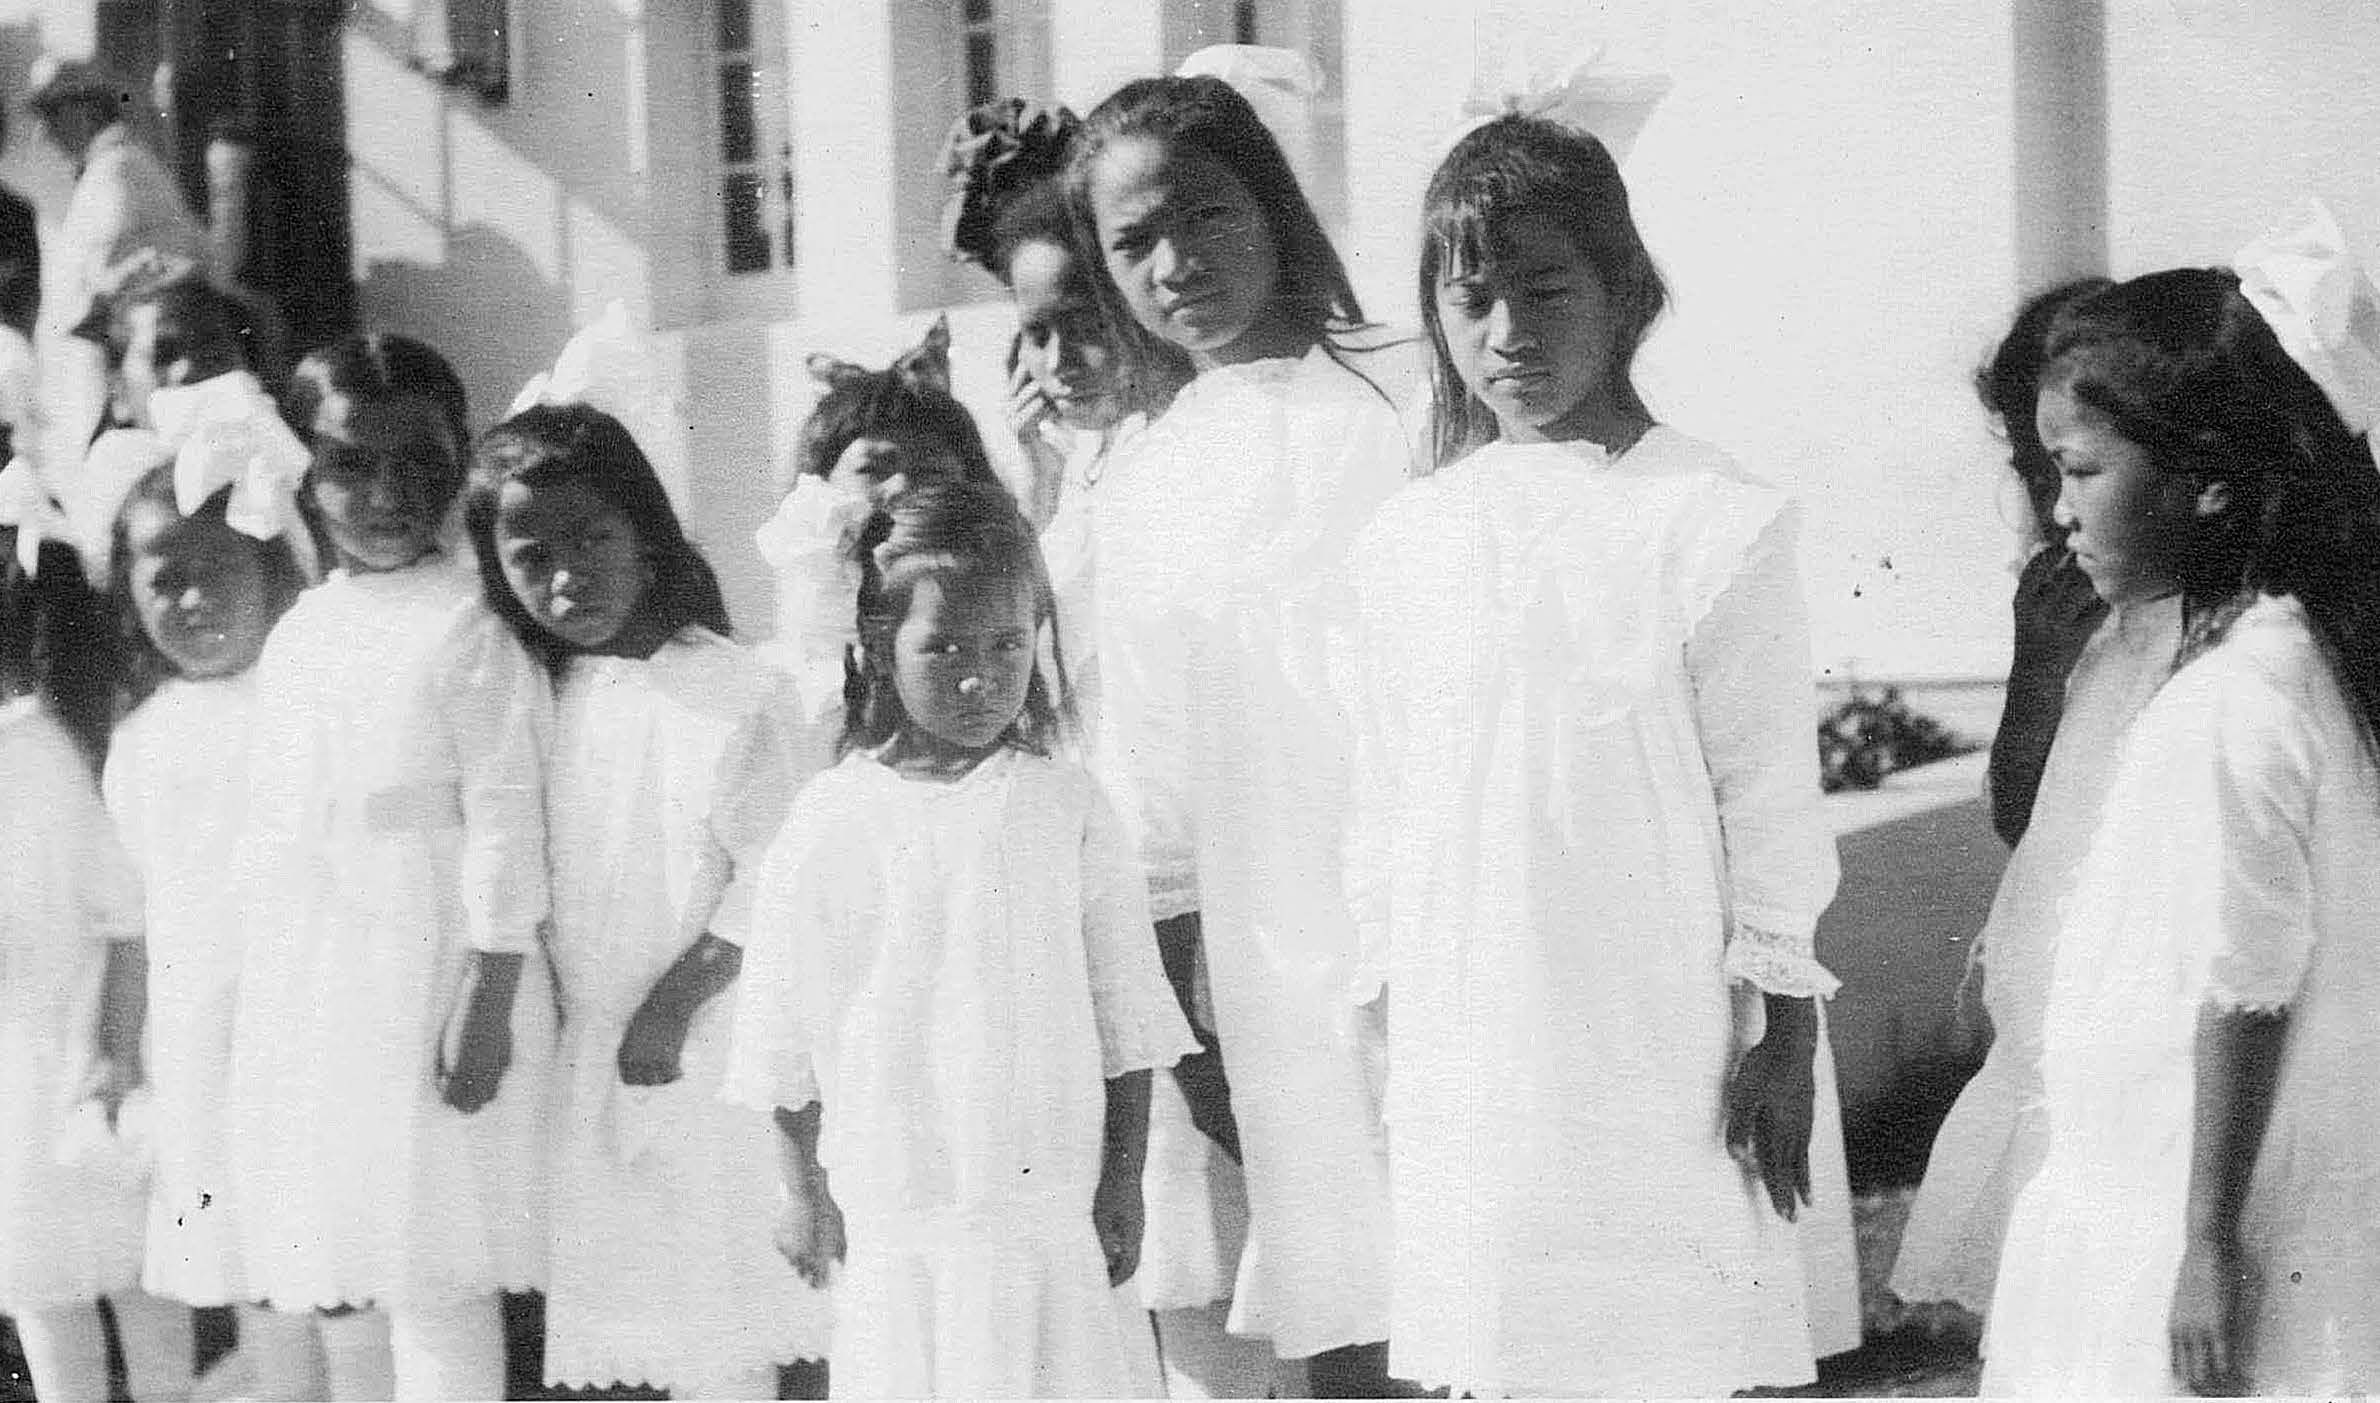 Line outside the temple for the Sunday morning dedicatory session, which was conducted entirely for the benefit of Primary-age children. Courtesy of Charles Ray Killian family.